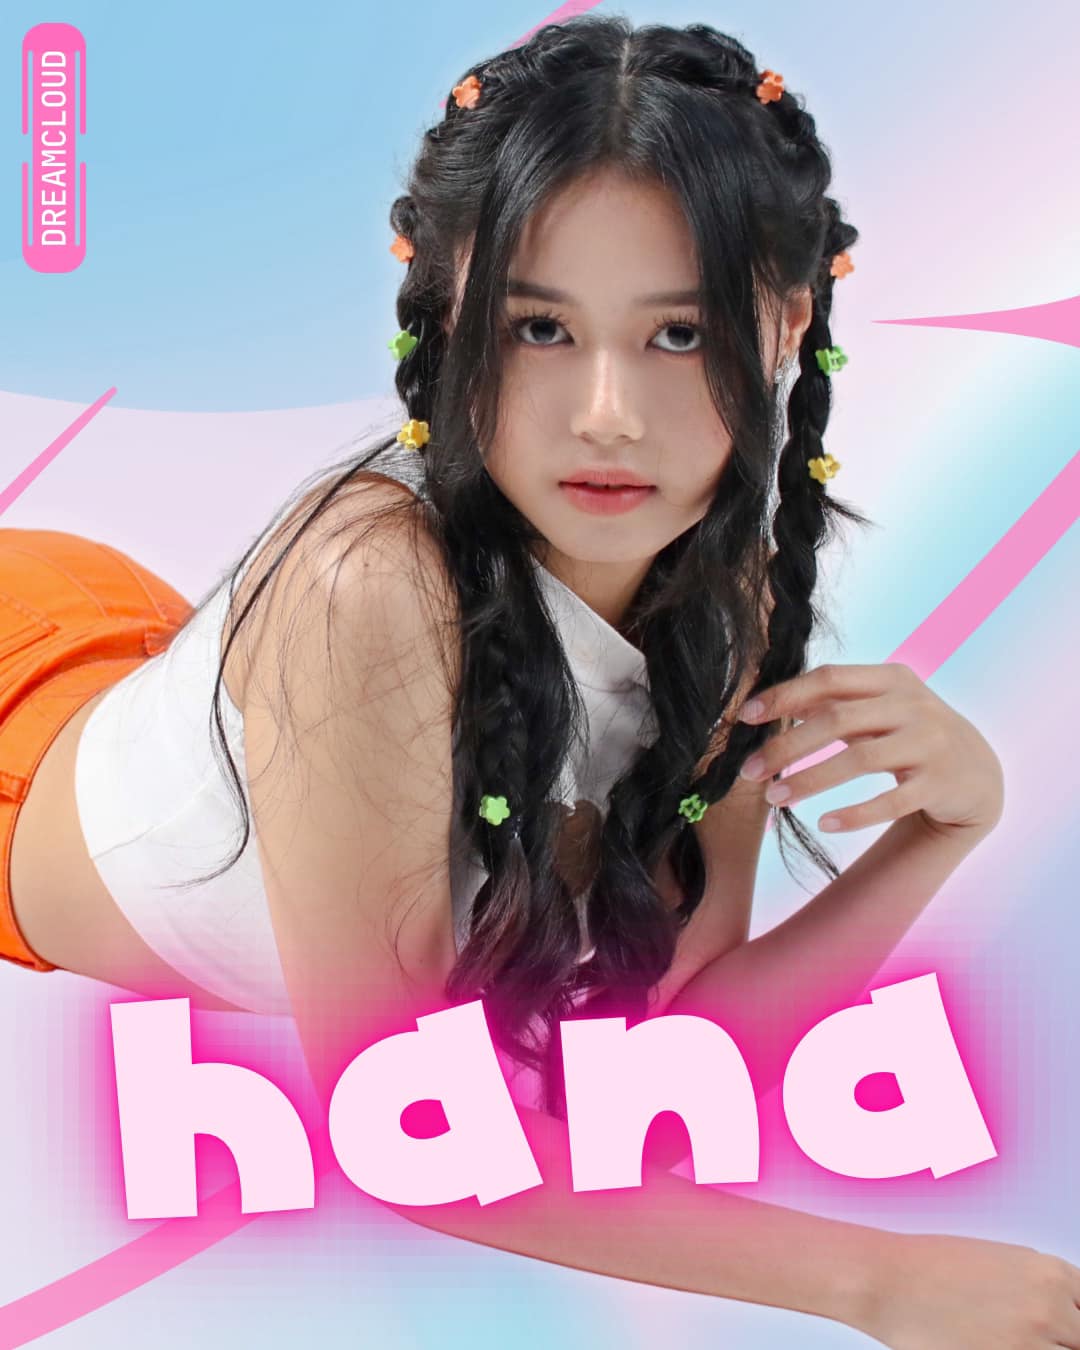 Hana of of the girl group project